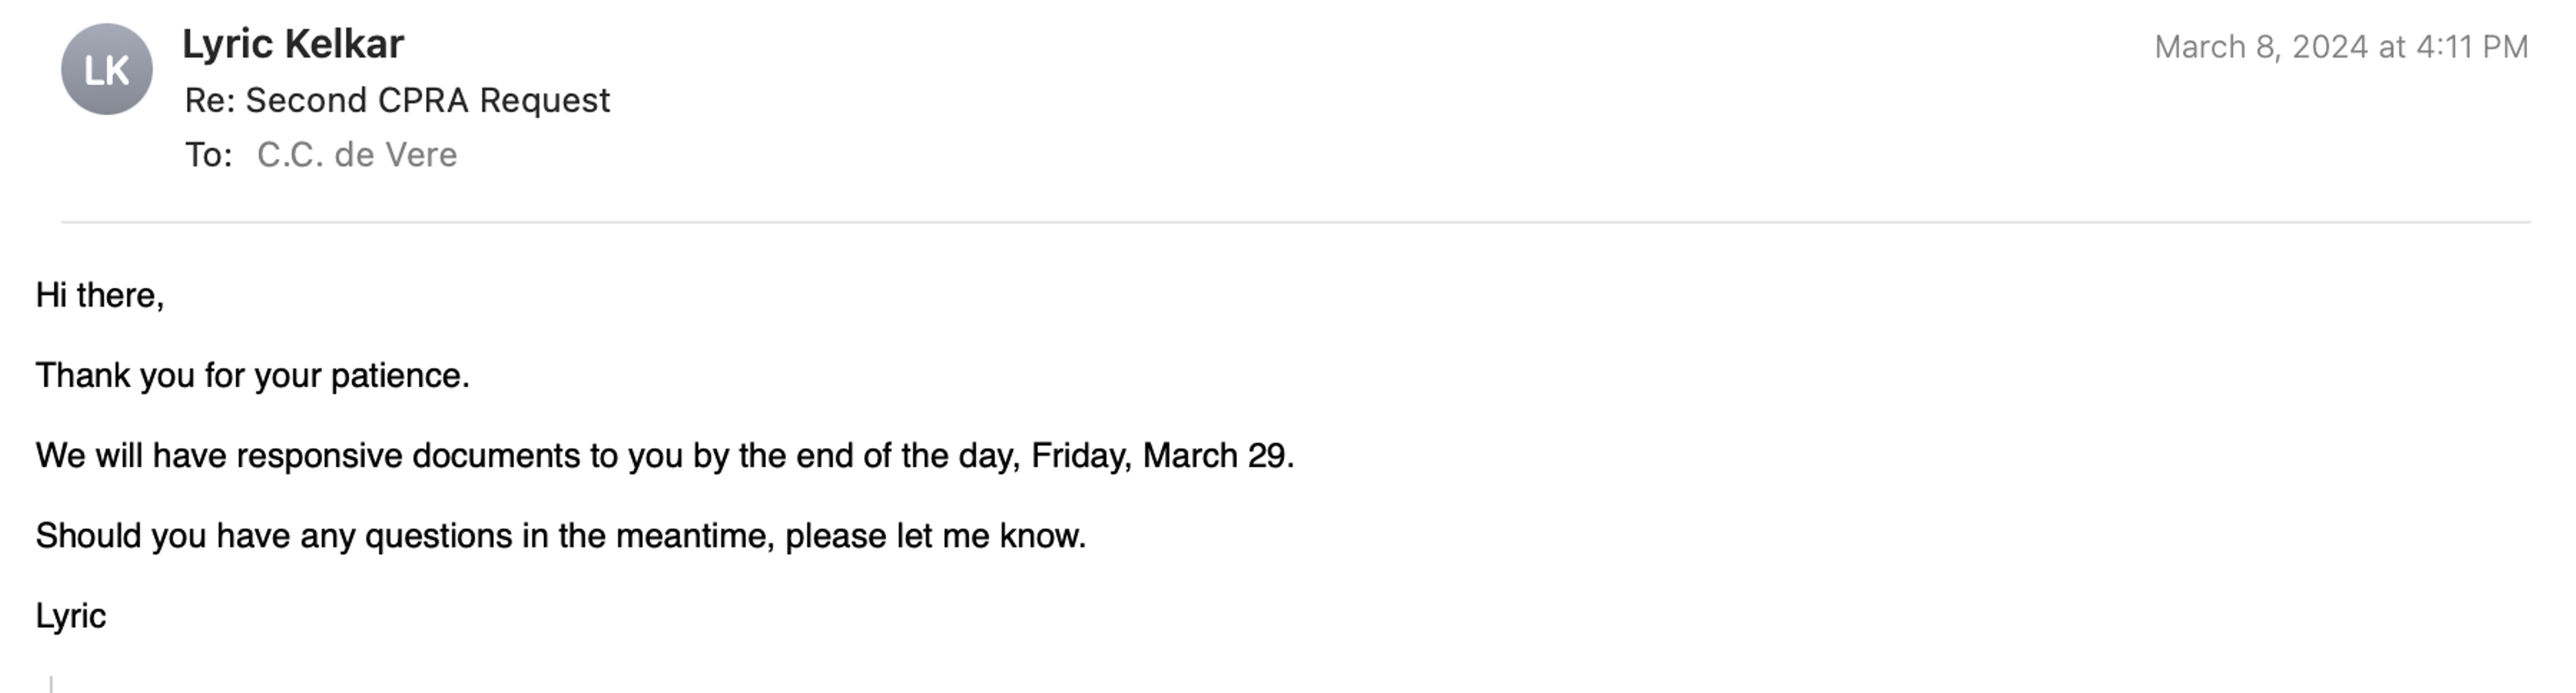 Screenshot of email promising to deliver requested documents by "the end of the day, Friday, March 29."